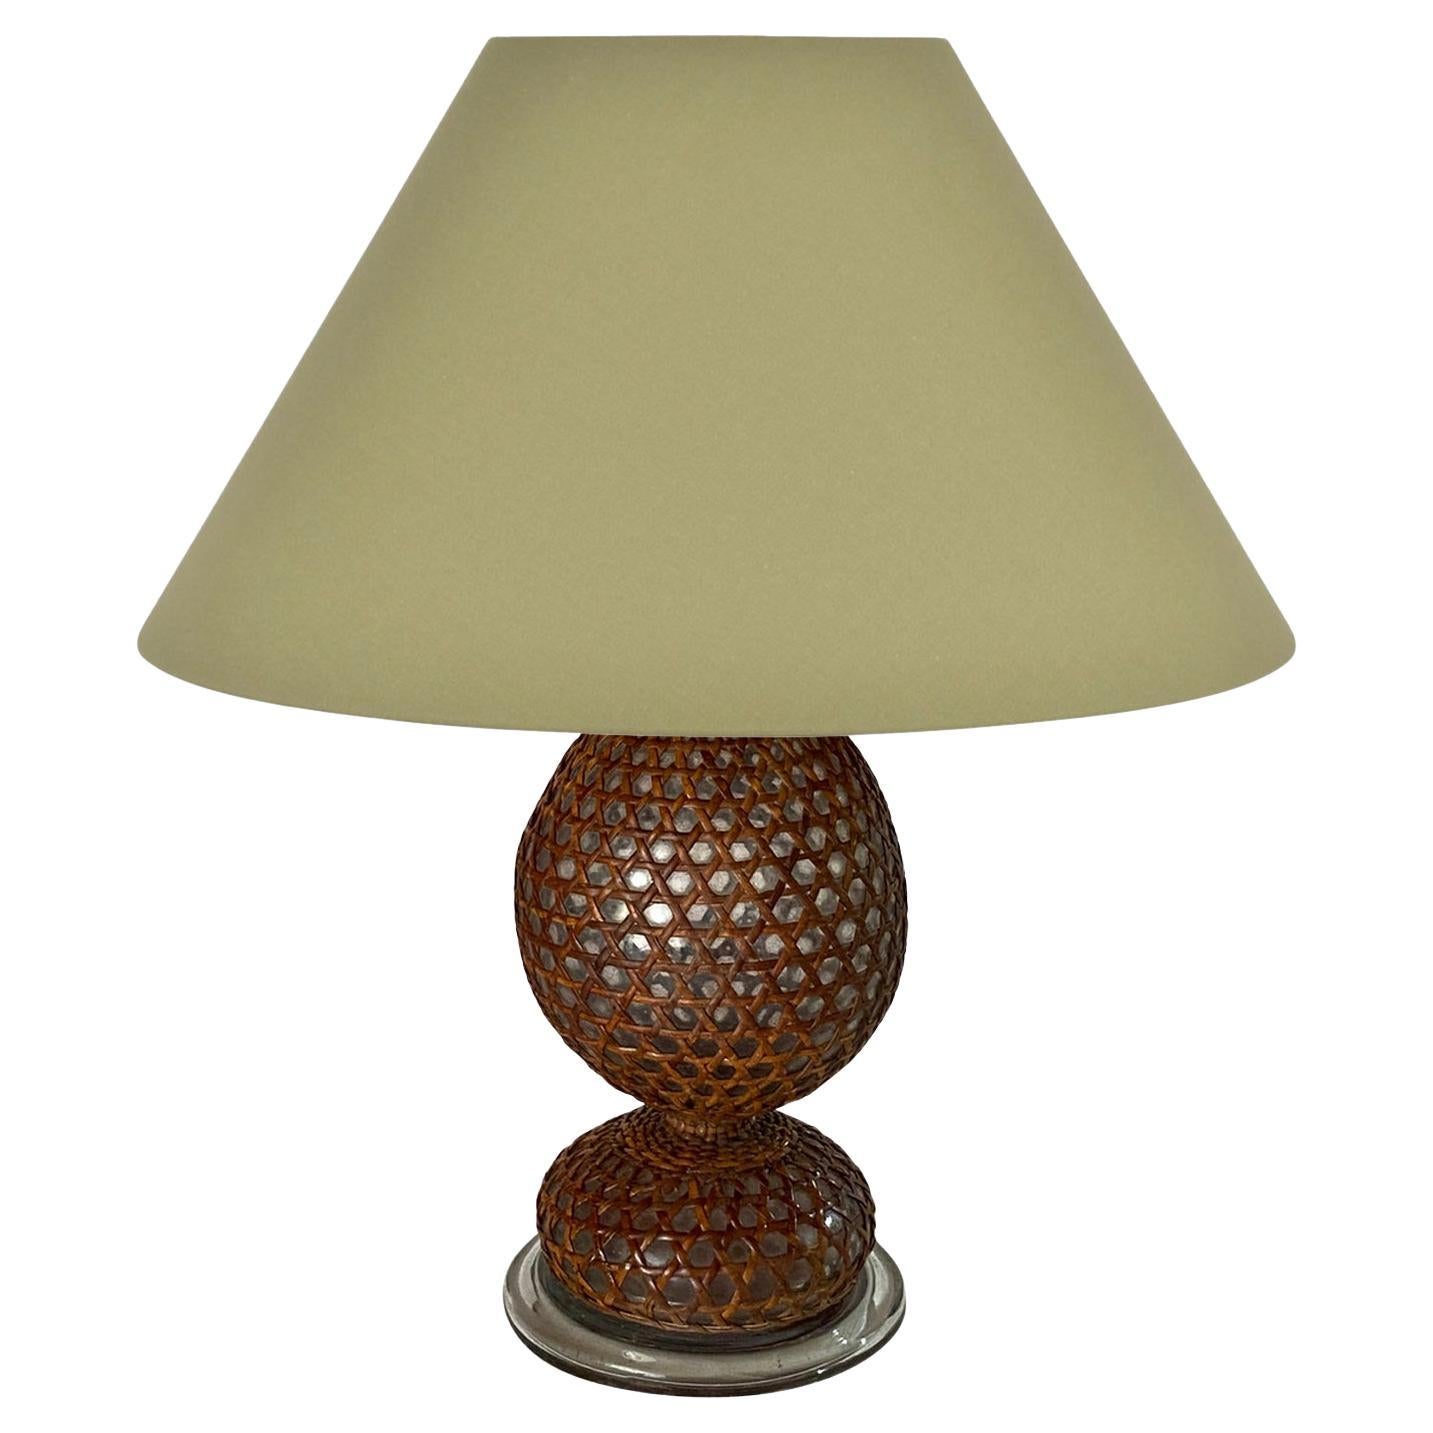 Glass and Rattan Table Lamp, Made in England, Brown Color, Circa 1970 In Good Condition For Sale In Auribeau sur Siagne, FR